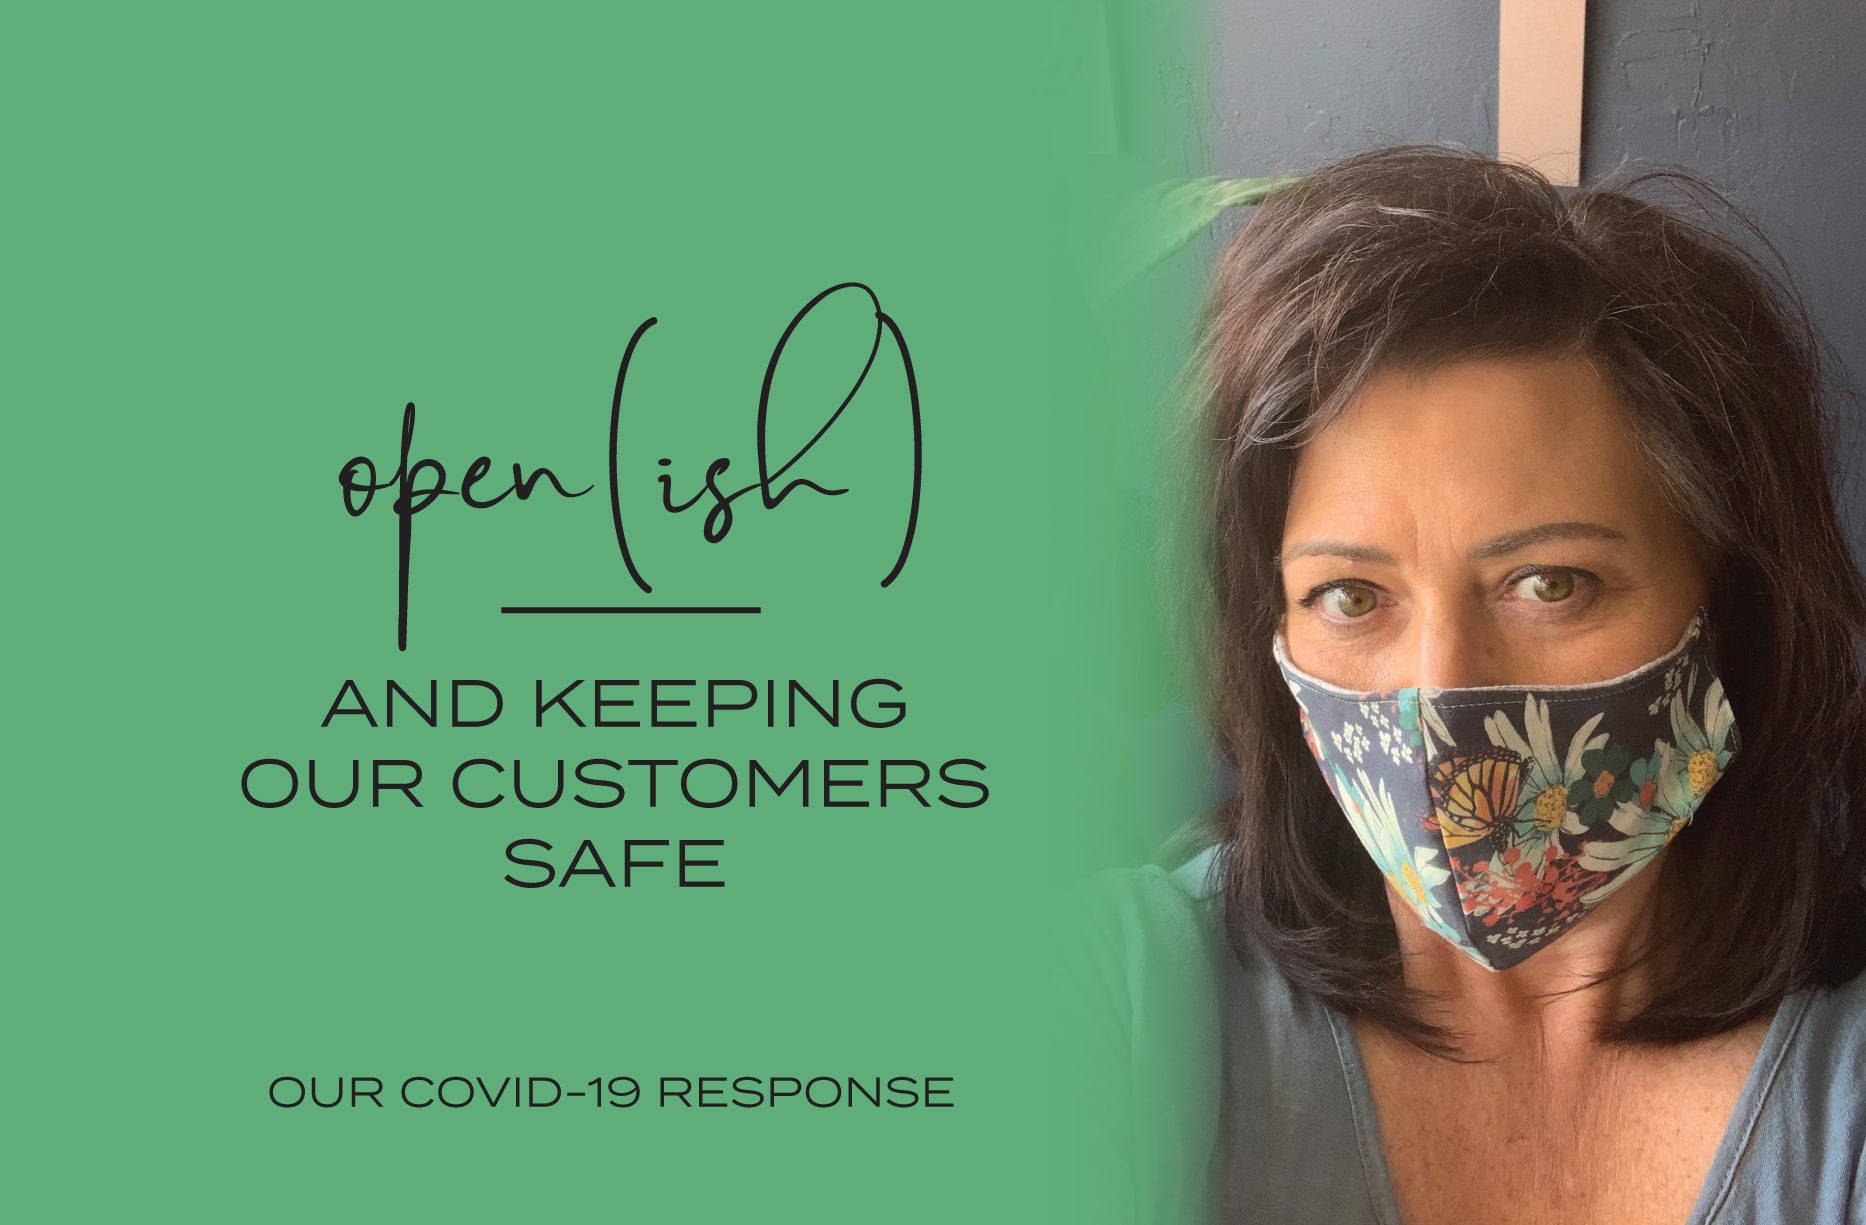 <p><b>Open(ish)</b></p> <p><i>and keeping our customers safe</i></p>